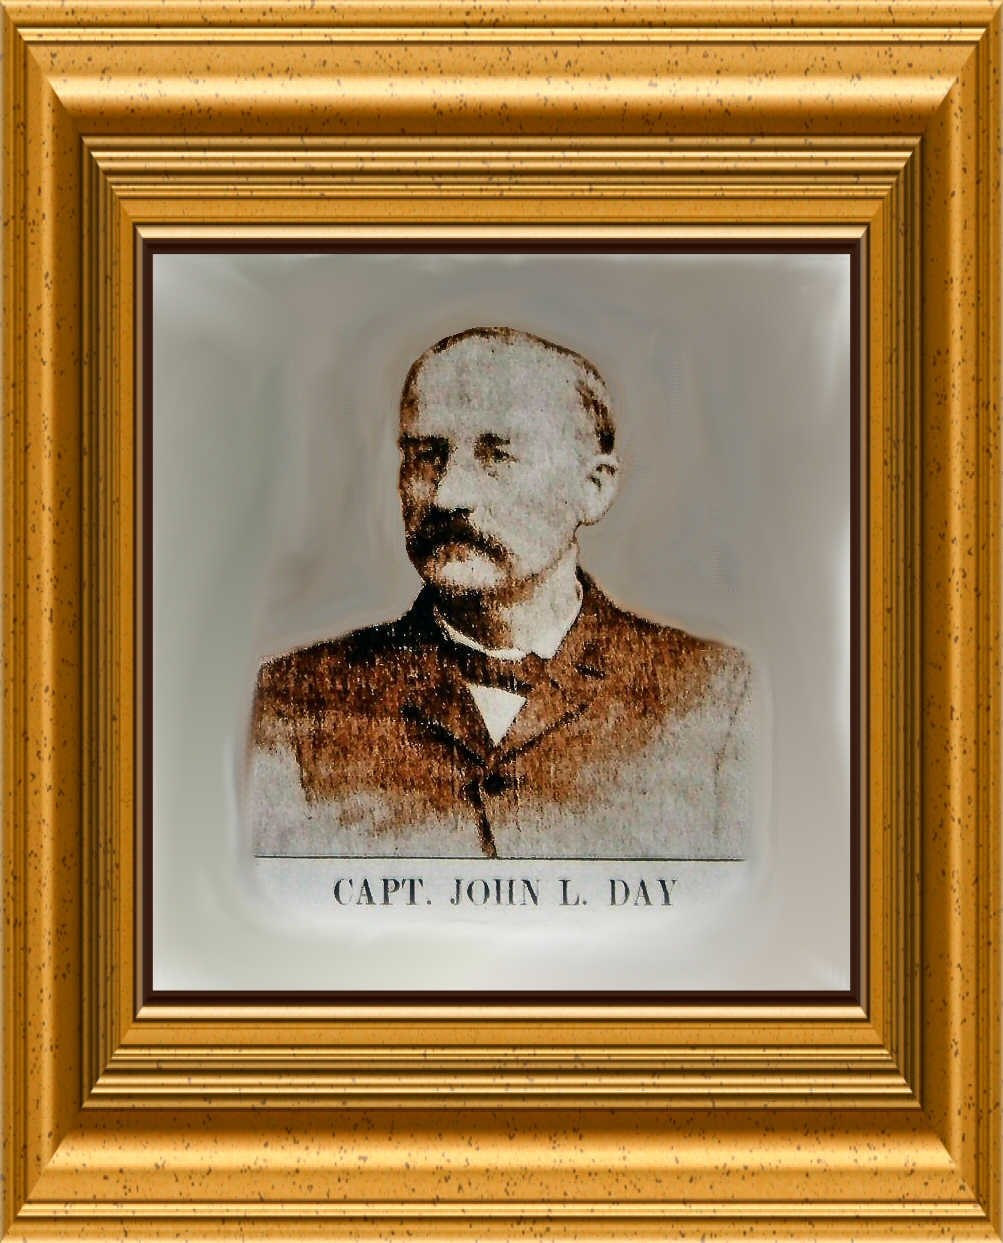 Capt. John L. Day - Commanded and Built Many Steamboats